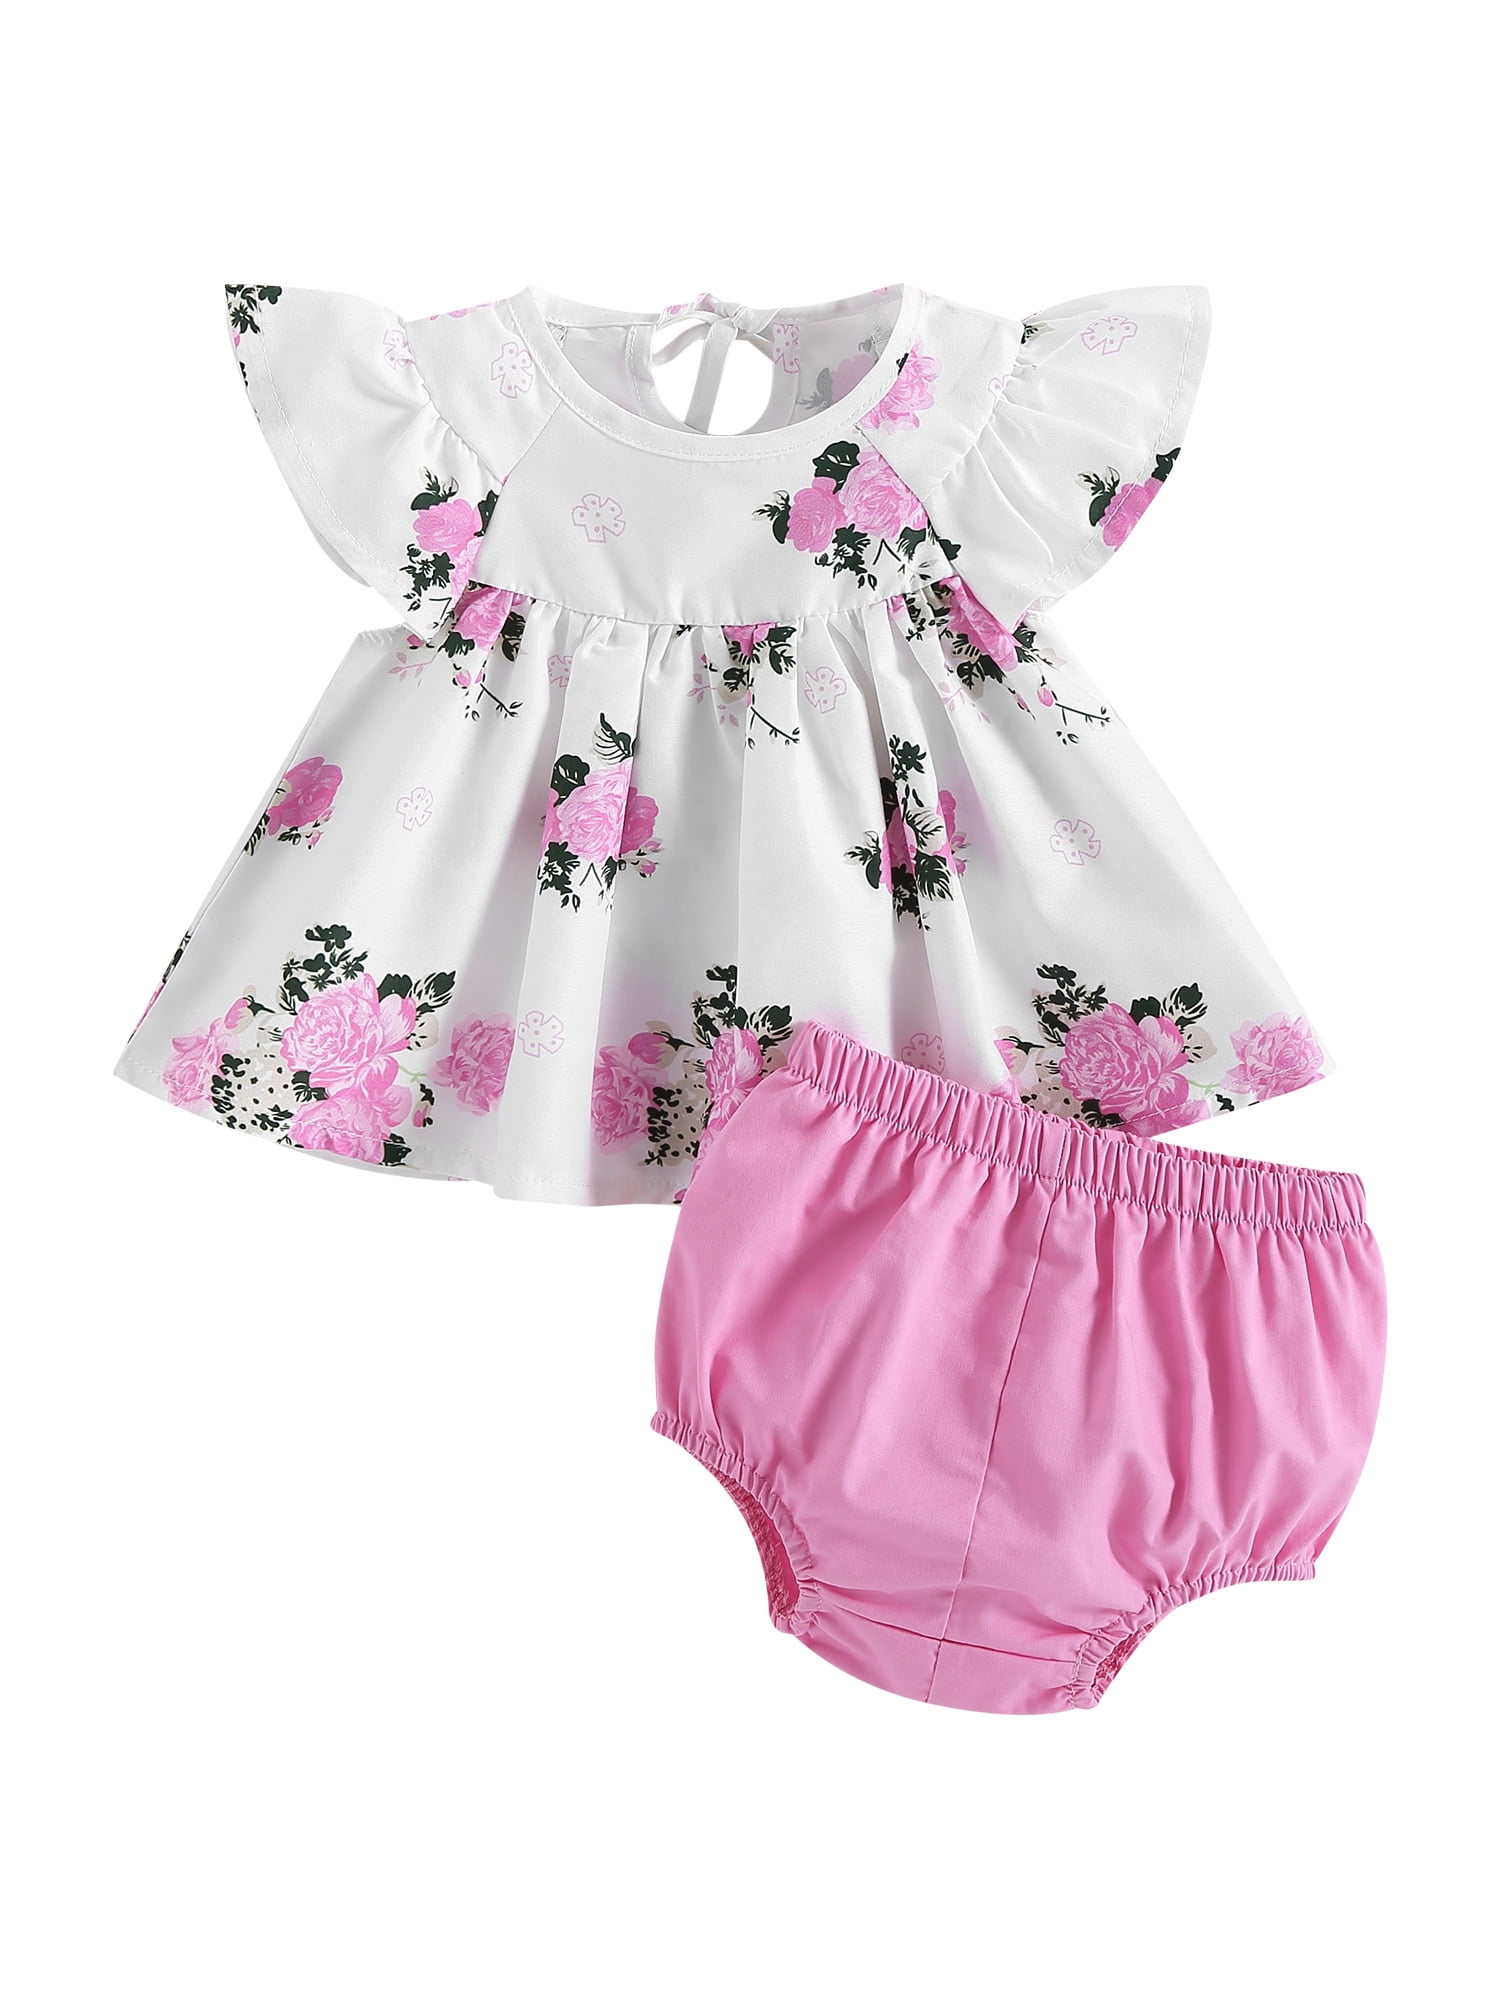 Newborn Infant Kids Baby Girl Floral Tops Dress Shorts Pants Clothes ...